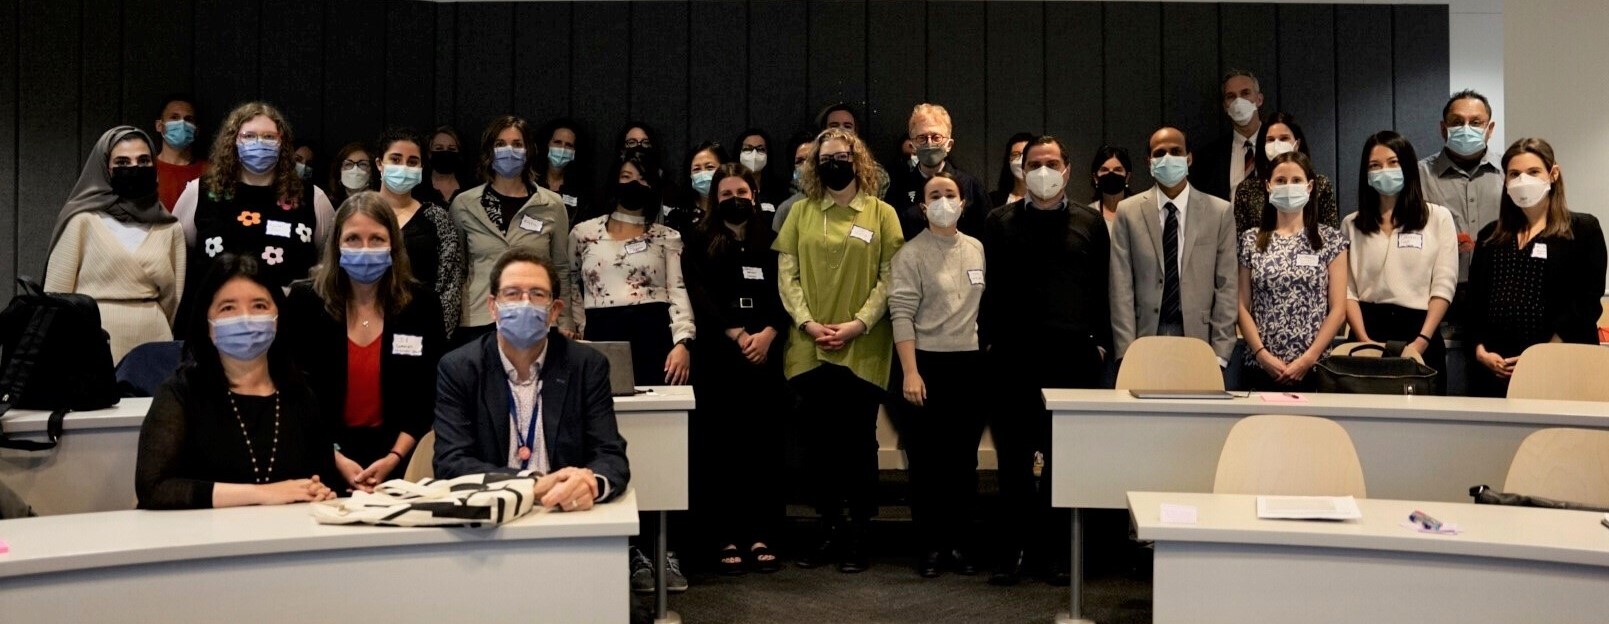 In-person attendees at the 2023 International Forum on COVID Rehabilitation Research post for a photo in a lecture hall. They are all wearing masks.